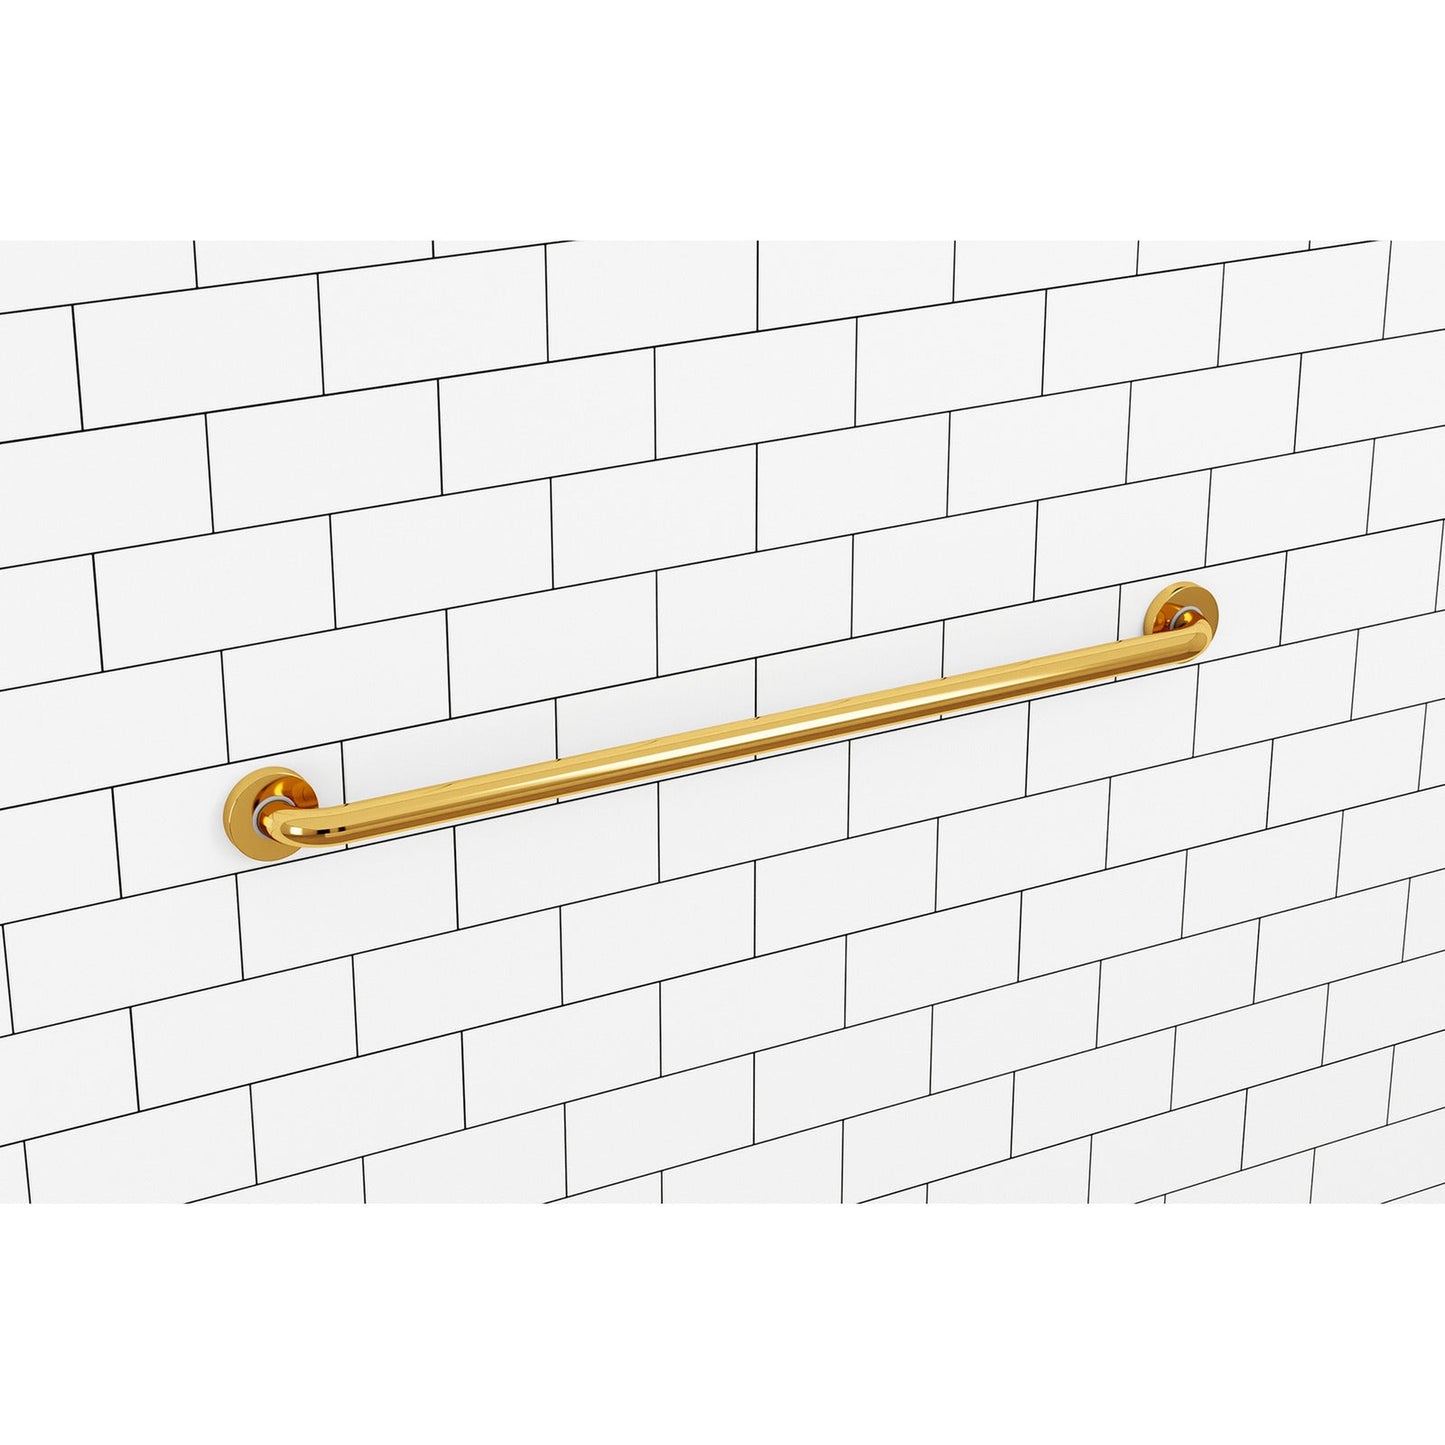 Evekare 36" x 1.25" Stainless Steel Concealed Mount Grab Bar in Gold